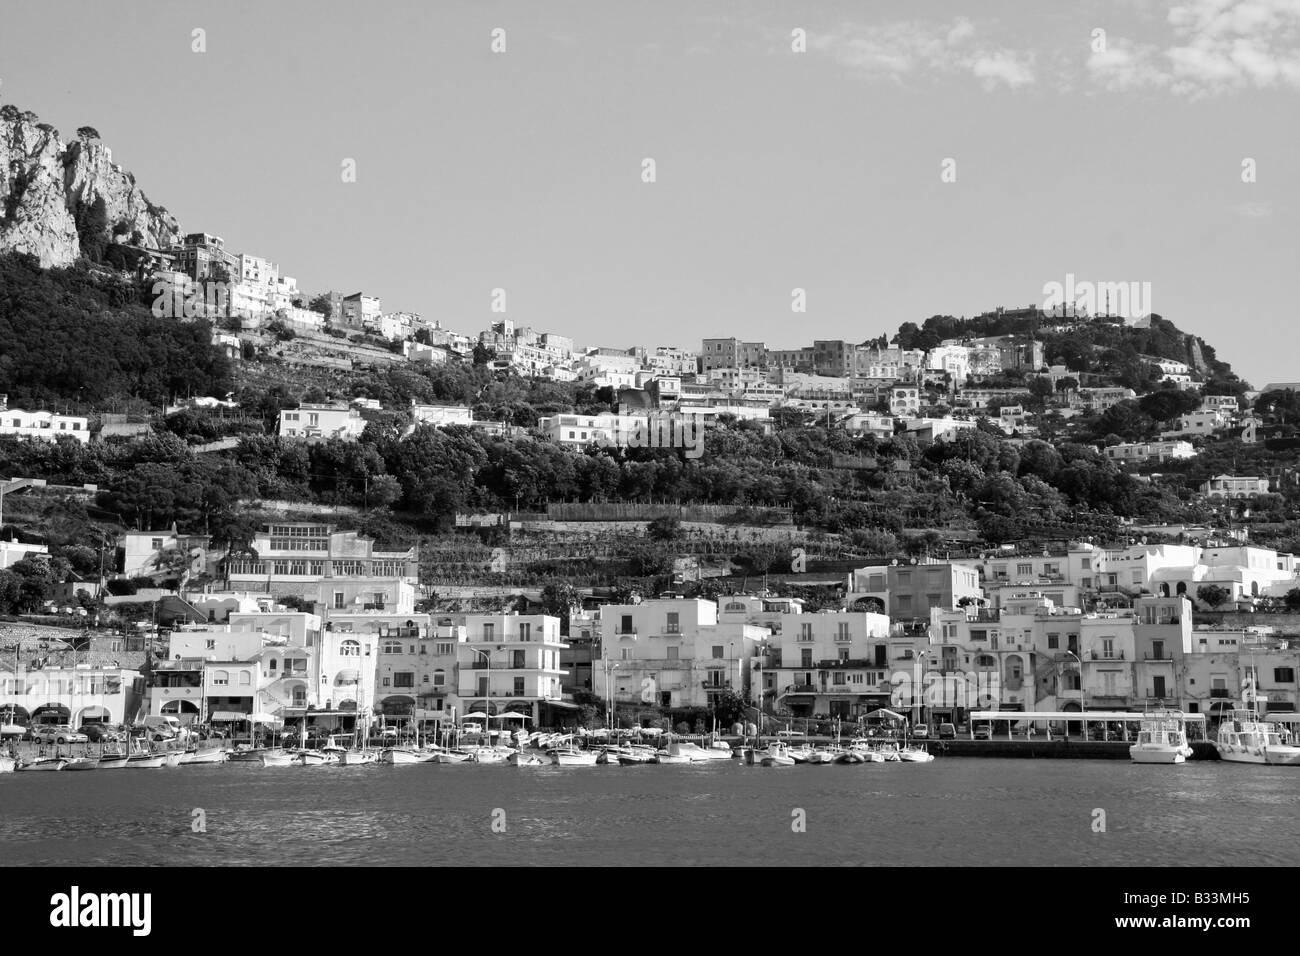 The island of Capri as seen from its port, in Italy, in Black and White Stock Photo